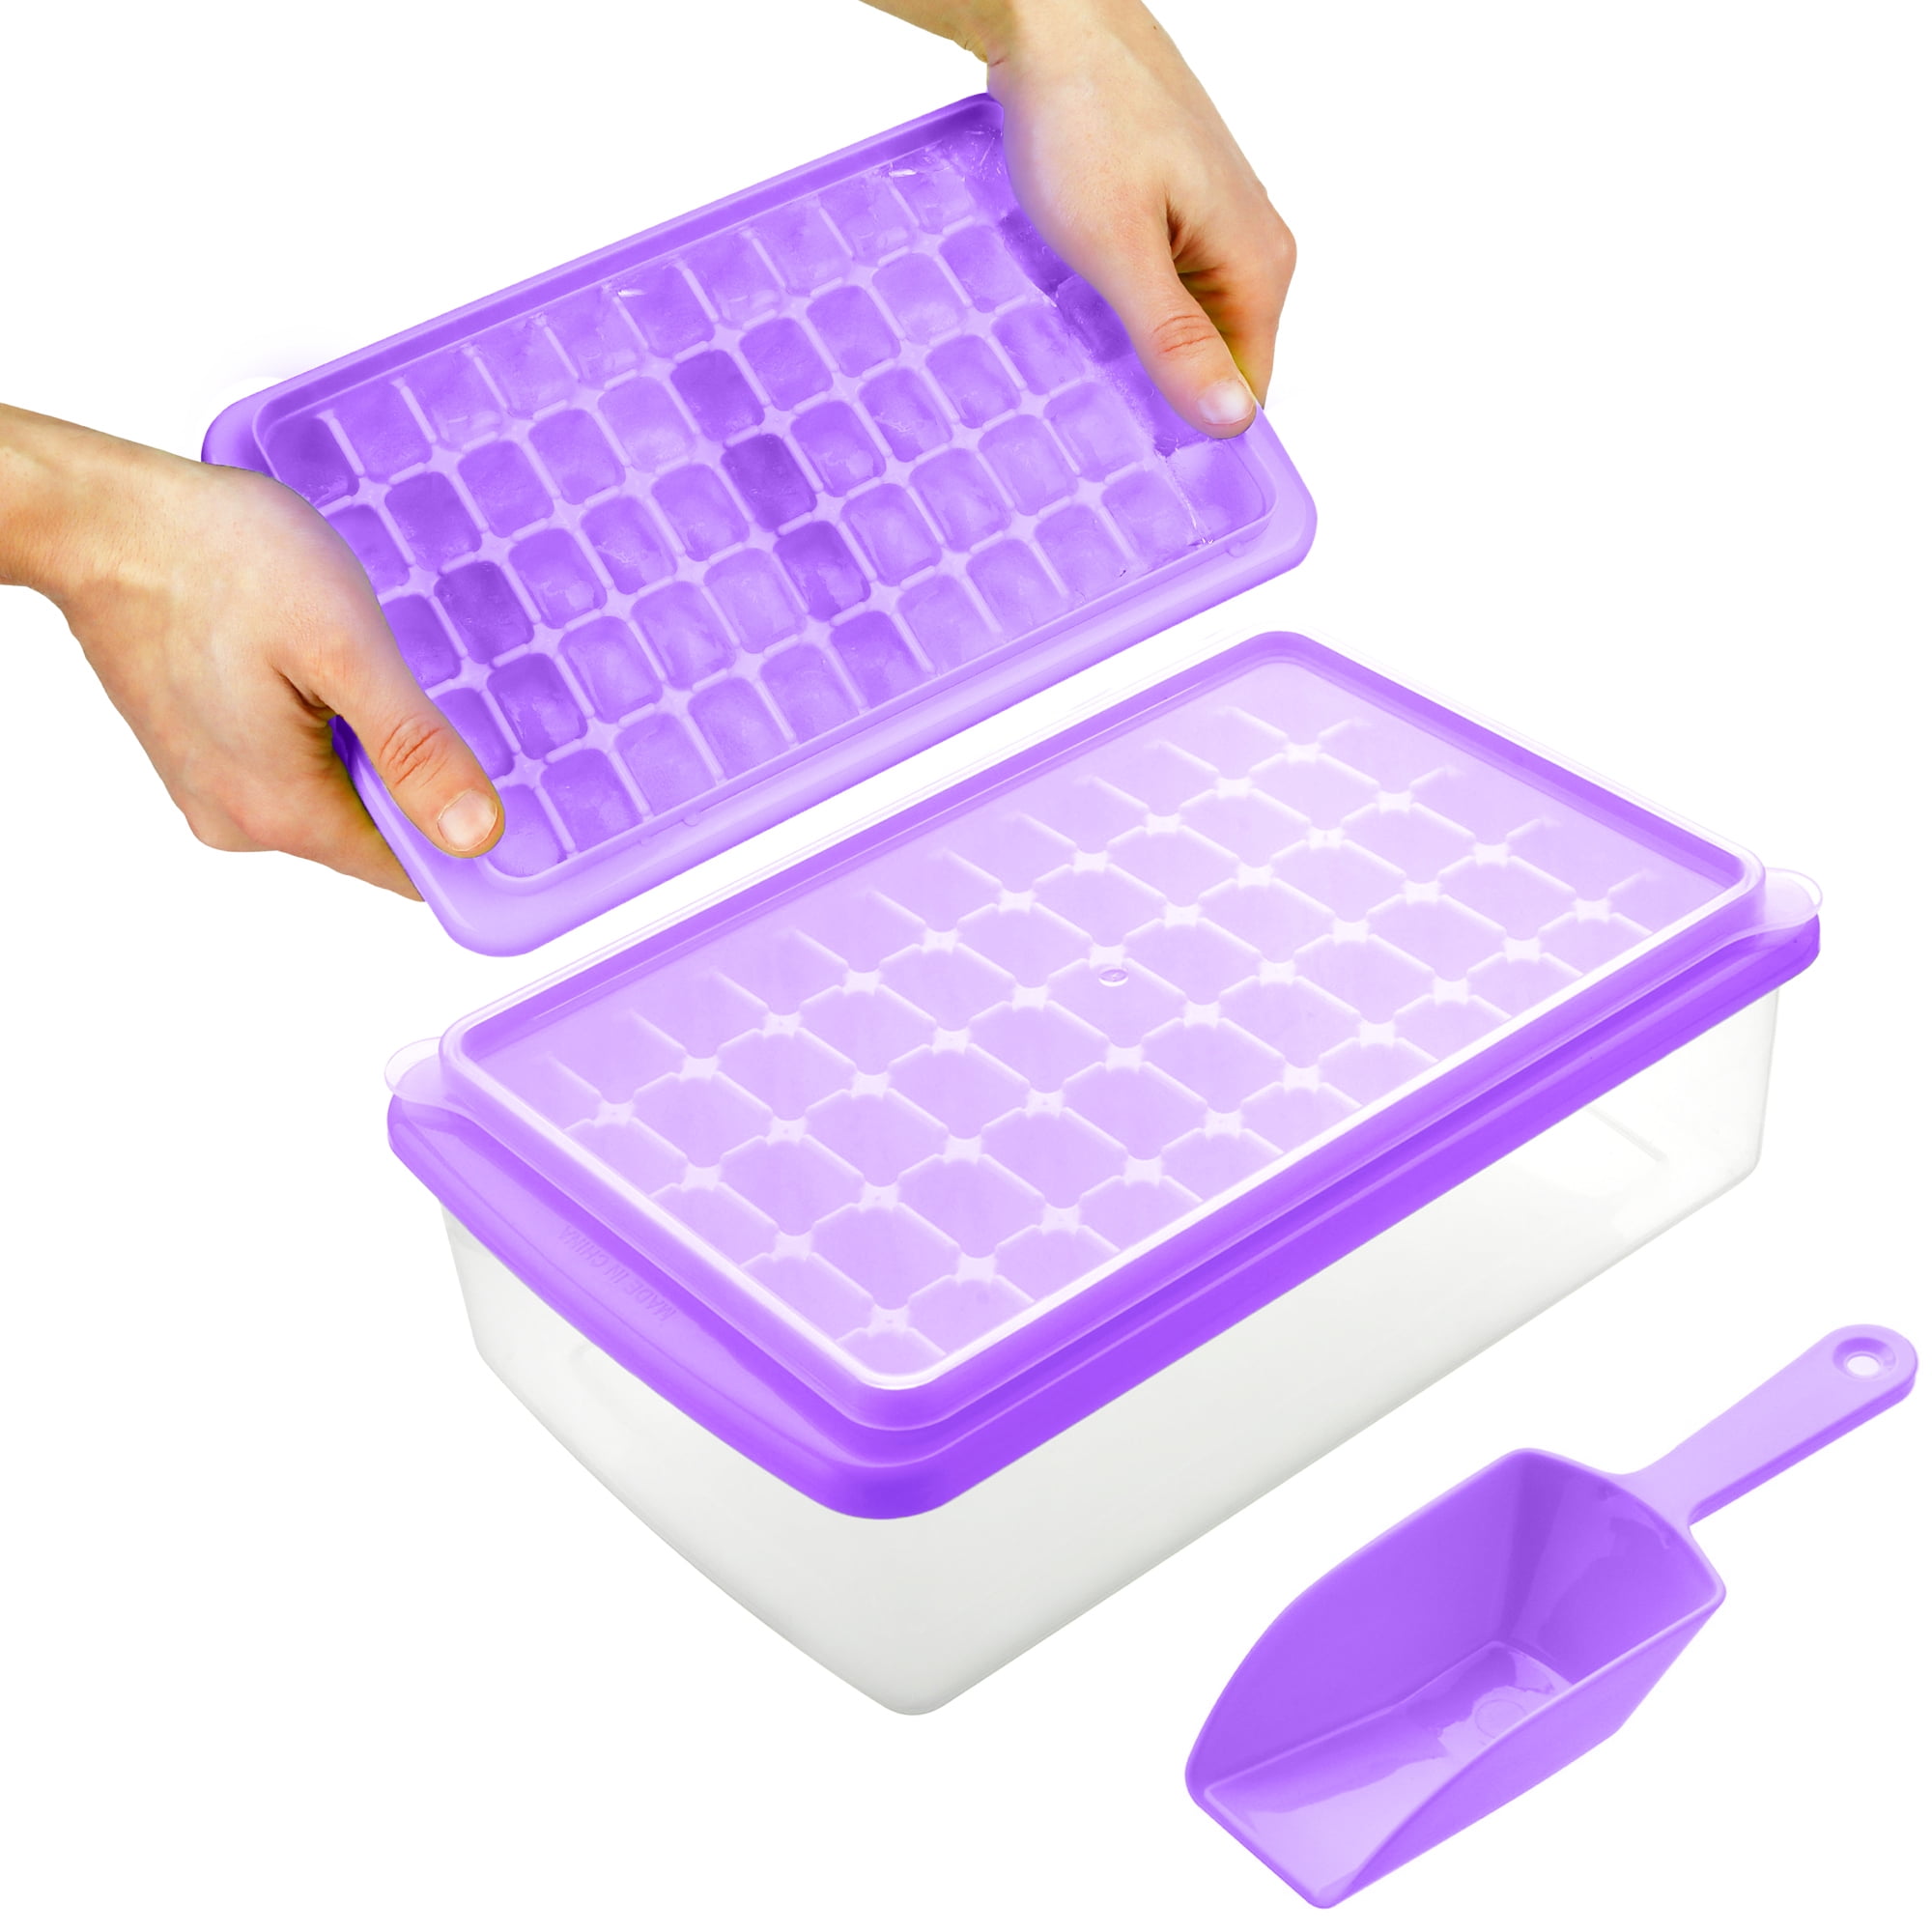 Humbee Ice Cube Tray, Soft Silicone Ice Tray with Lid, Flexible and  Stackable Ice Cube Trays for Freezer, 1-Inch Cubes (24 Cubes, Pink)